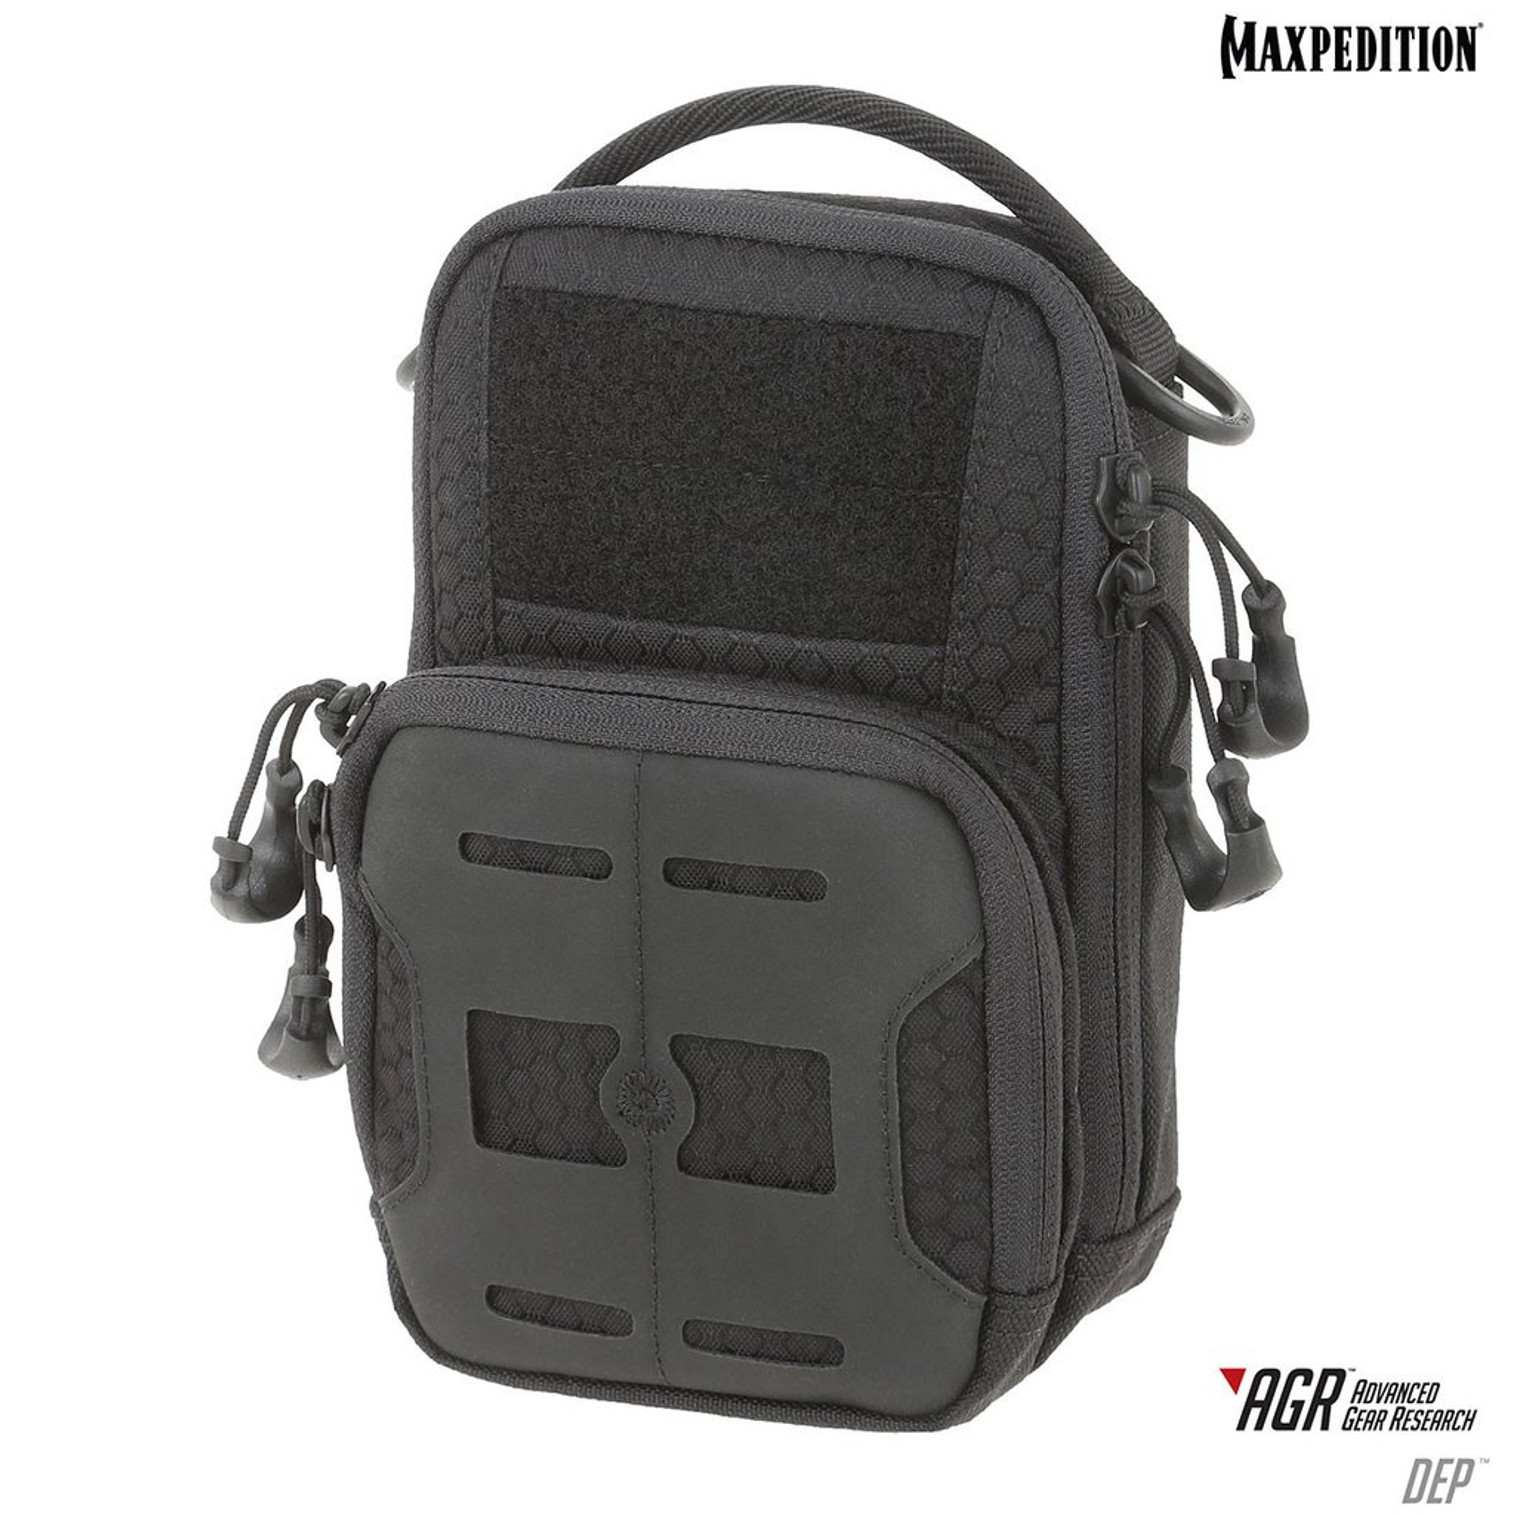 Maxpedition AGR DEP Daily Essentials Pouch - Black